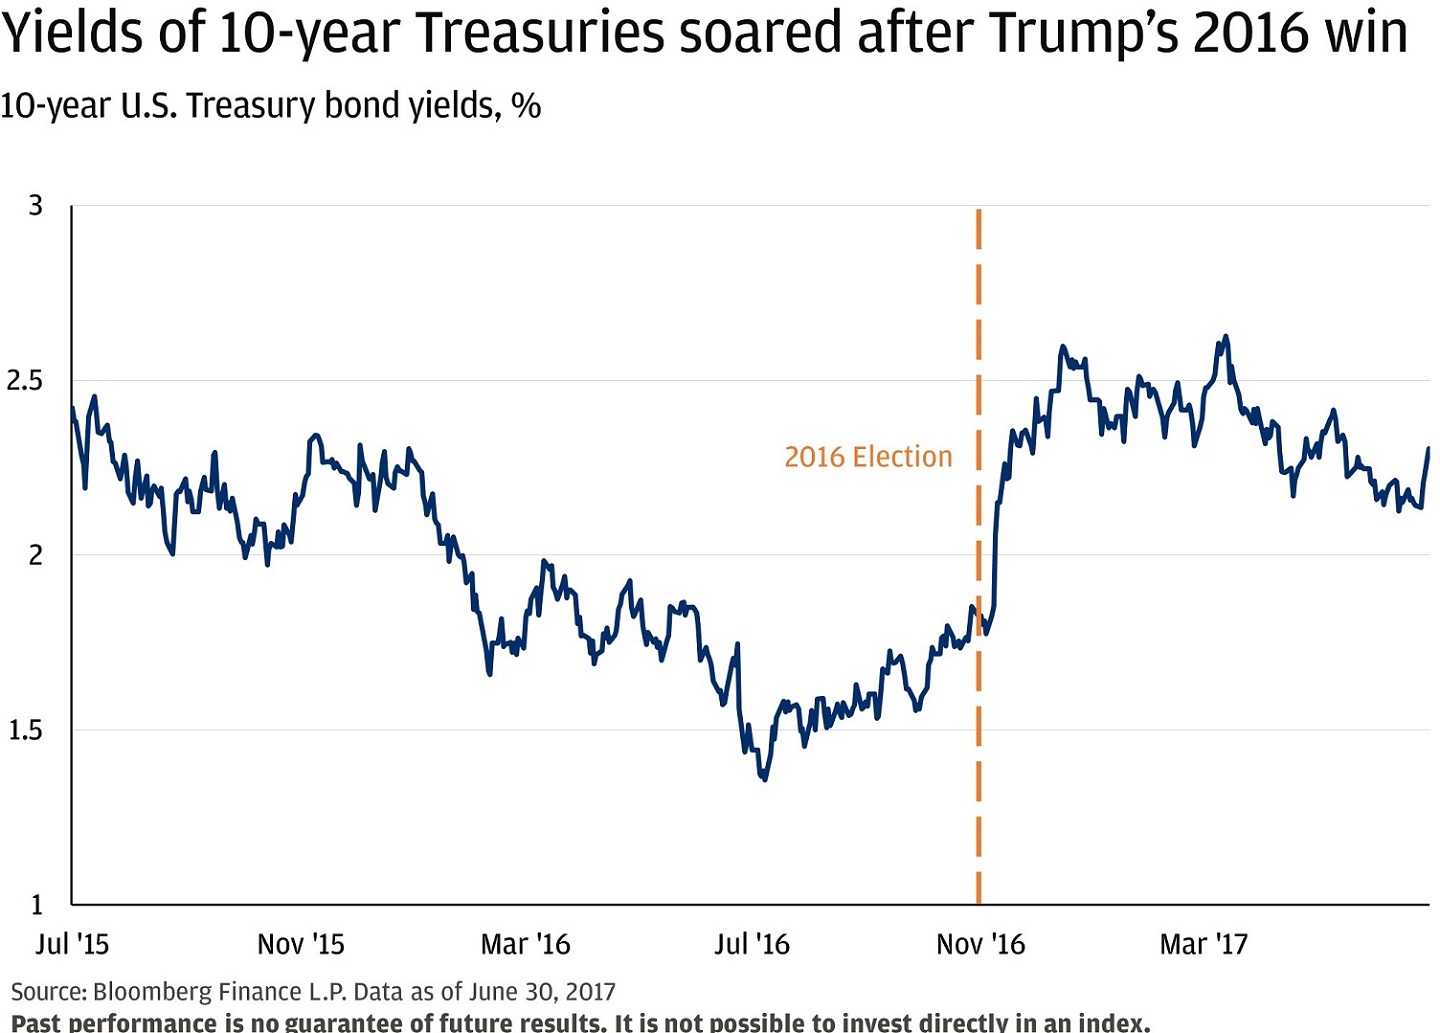 This chart shows yields of 10-year US treasury bonds from July 2015 to June 2017.